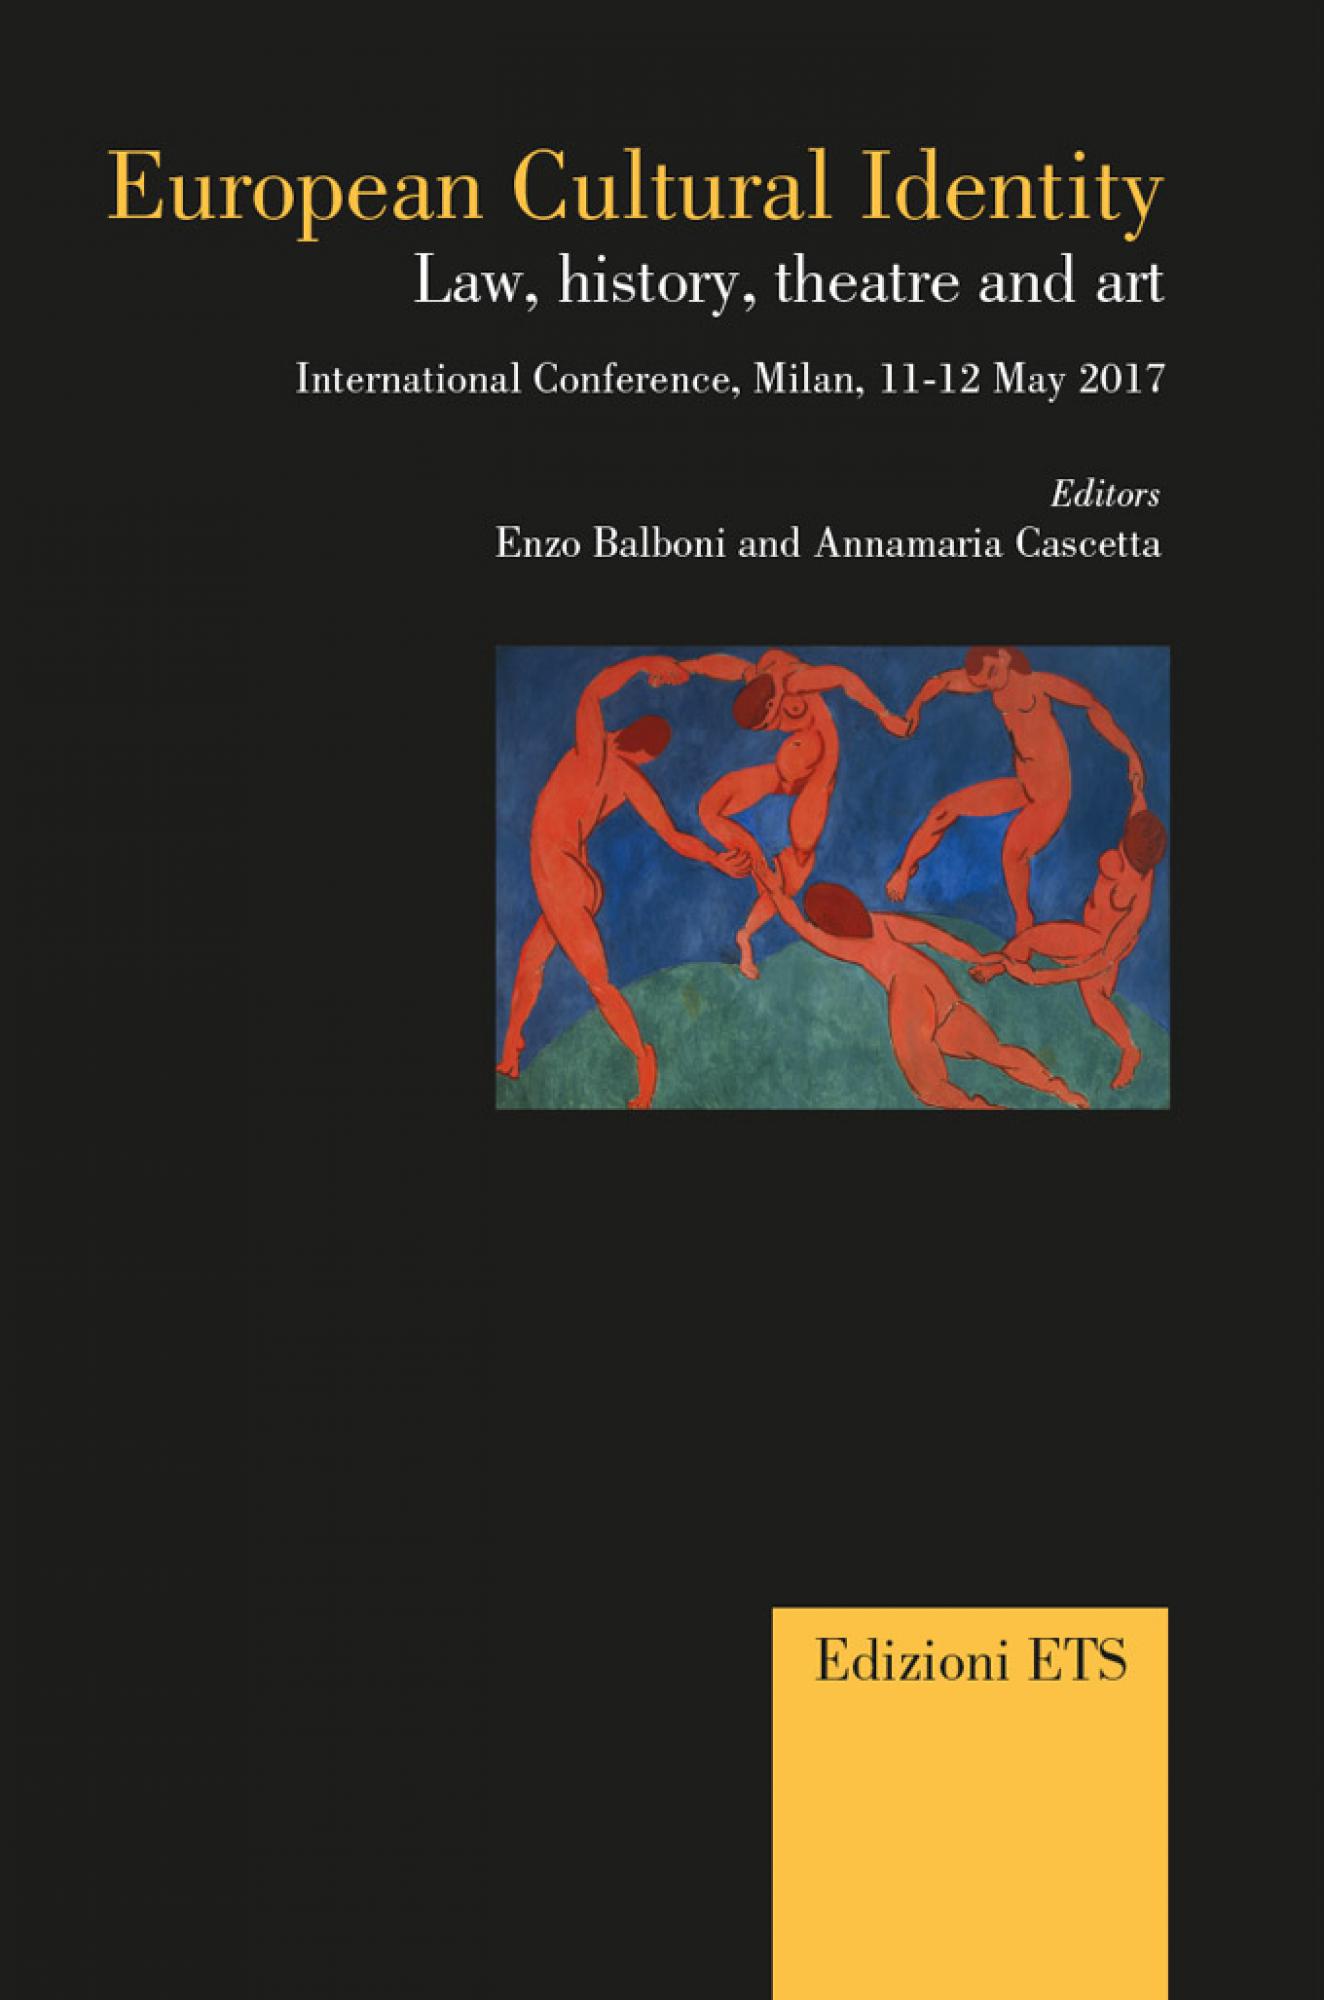 European Cultural Identity.Law, history, theatre and art. International Conference, Milan, 11-12 May 2017